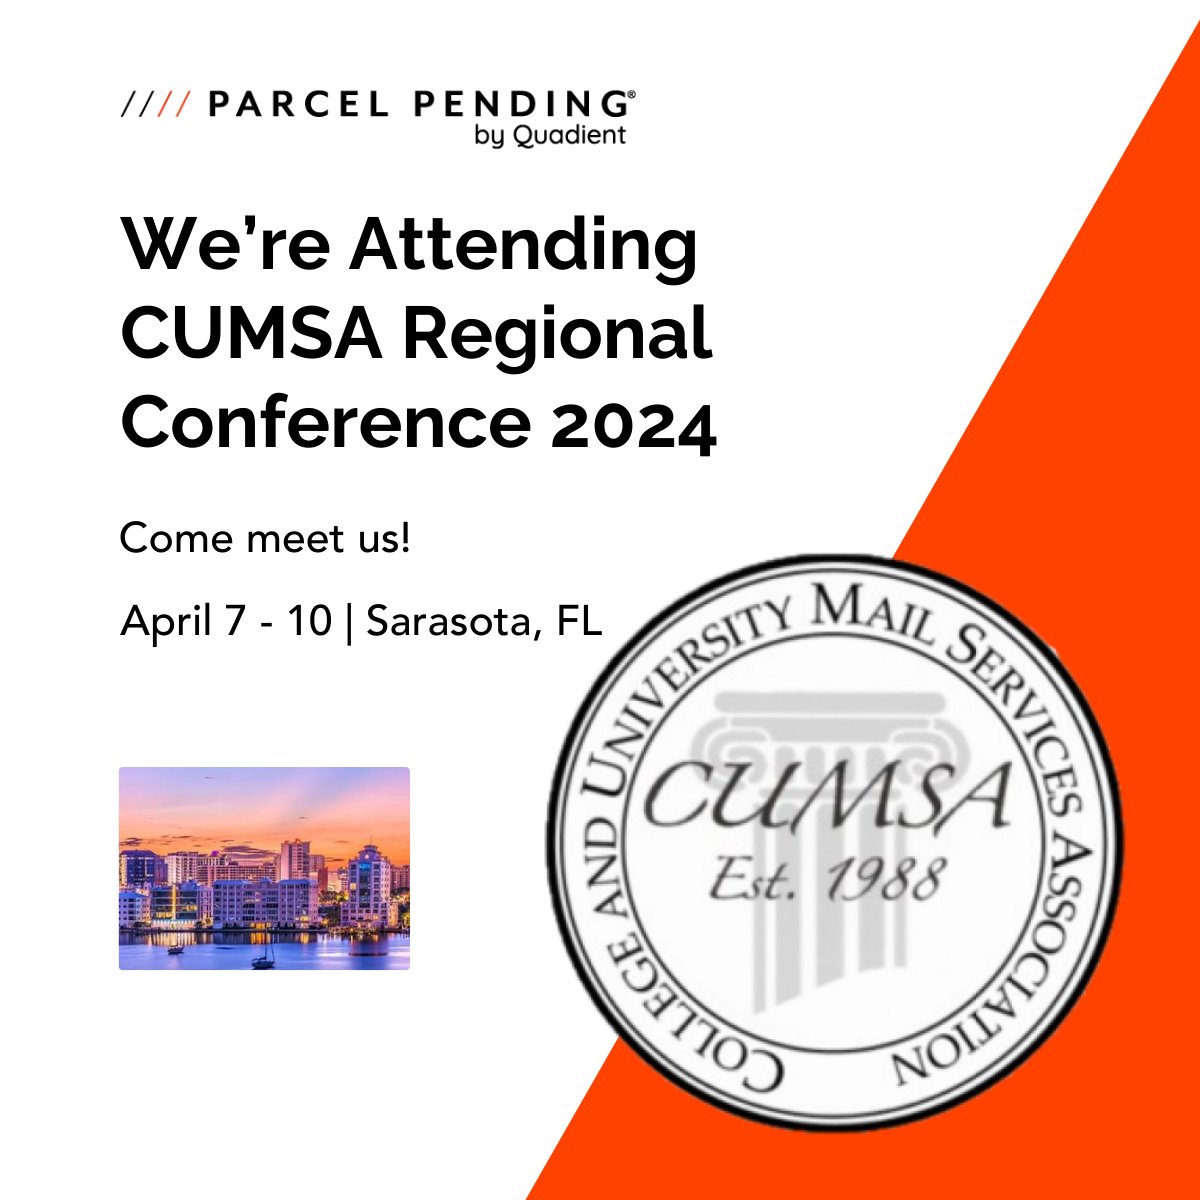 We are attending CUMSA's Regional Conference next month in Sarasota. Stop by our table to meet our team and learn how #smartlockers can improve the campus experience. bit.ly/3Tm36PE